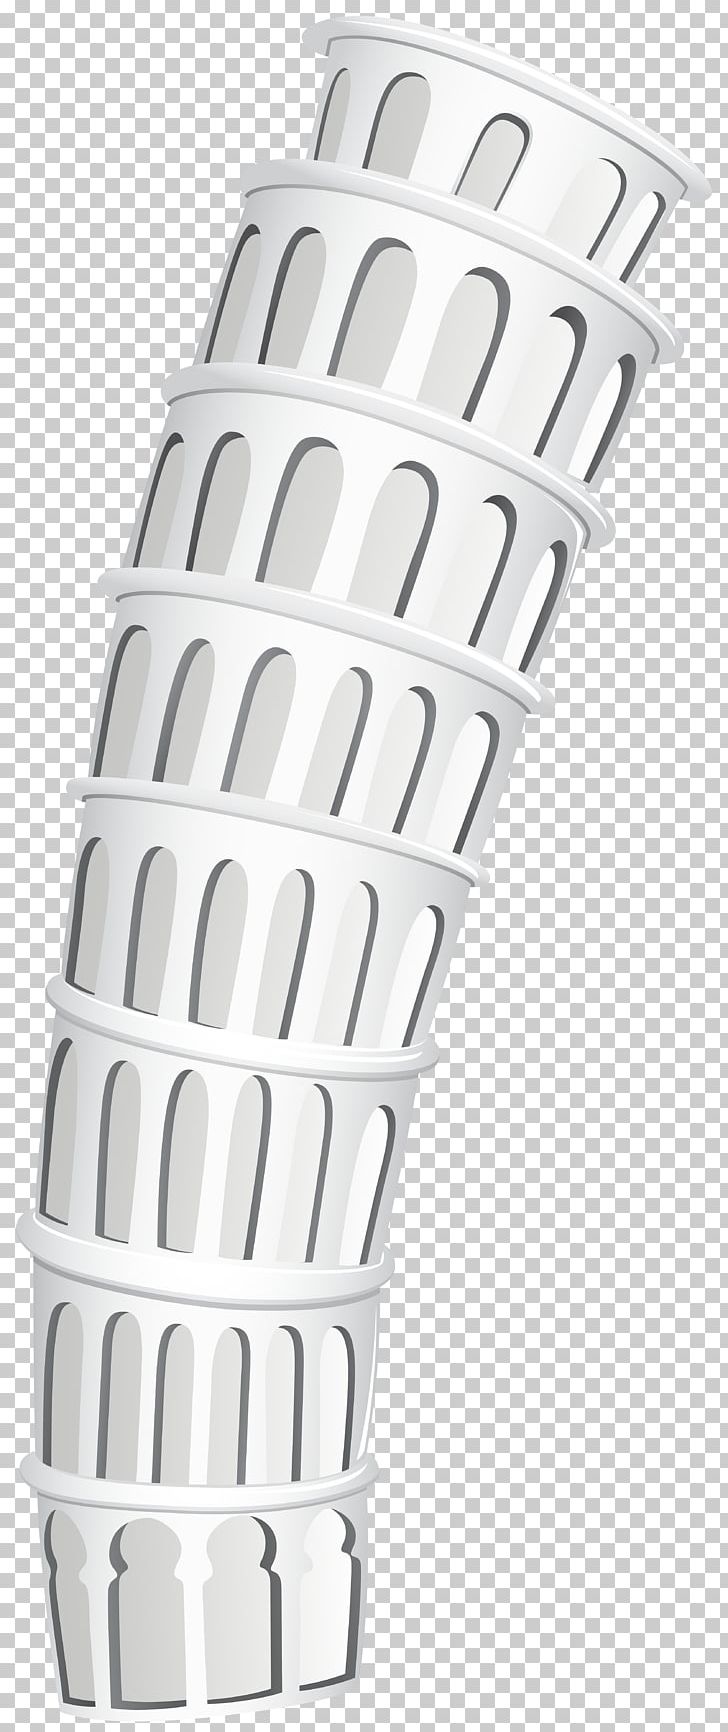 Leaning Tower Of Pisa PNG, Clipart, Angle, Landmark, Leaning Tower Of Pisa, Miscellaneous, Others Free PNG Download